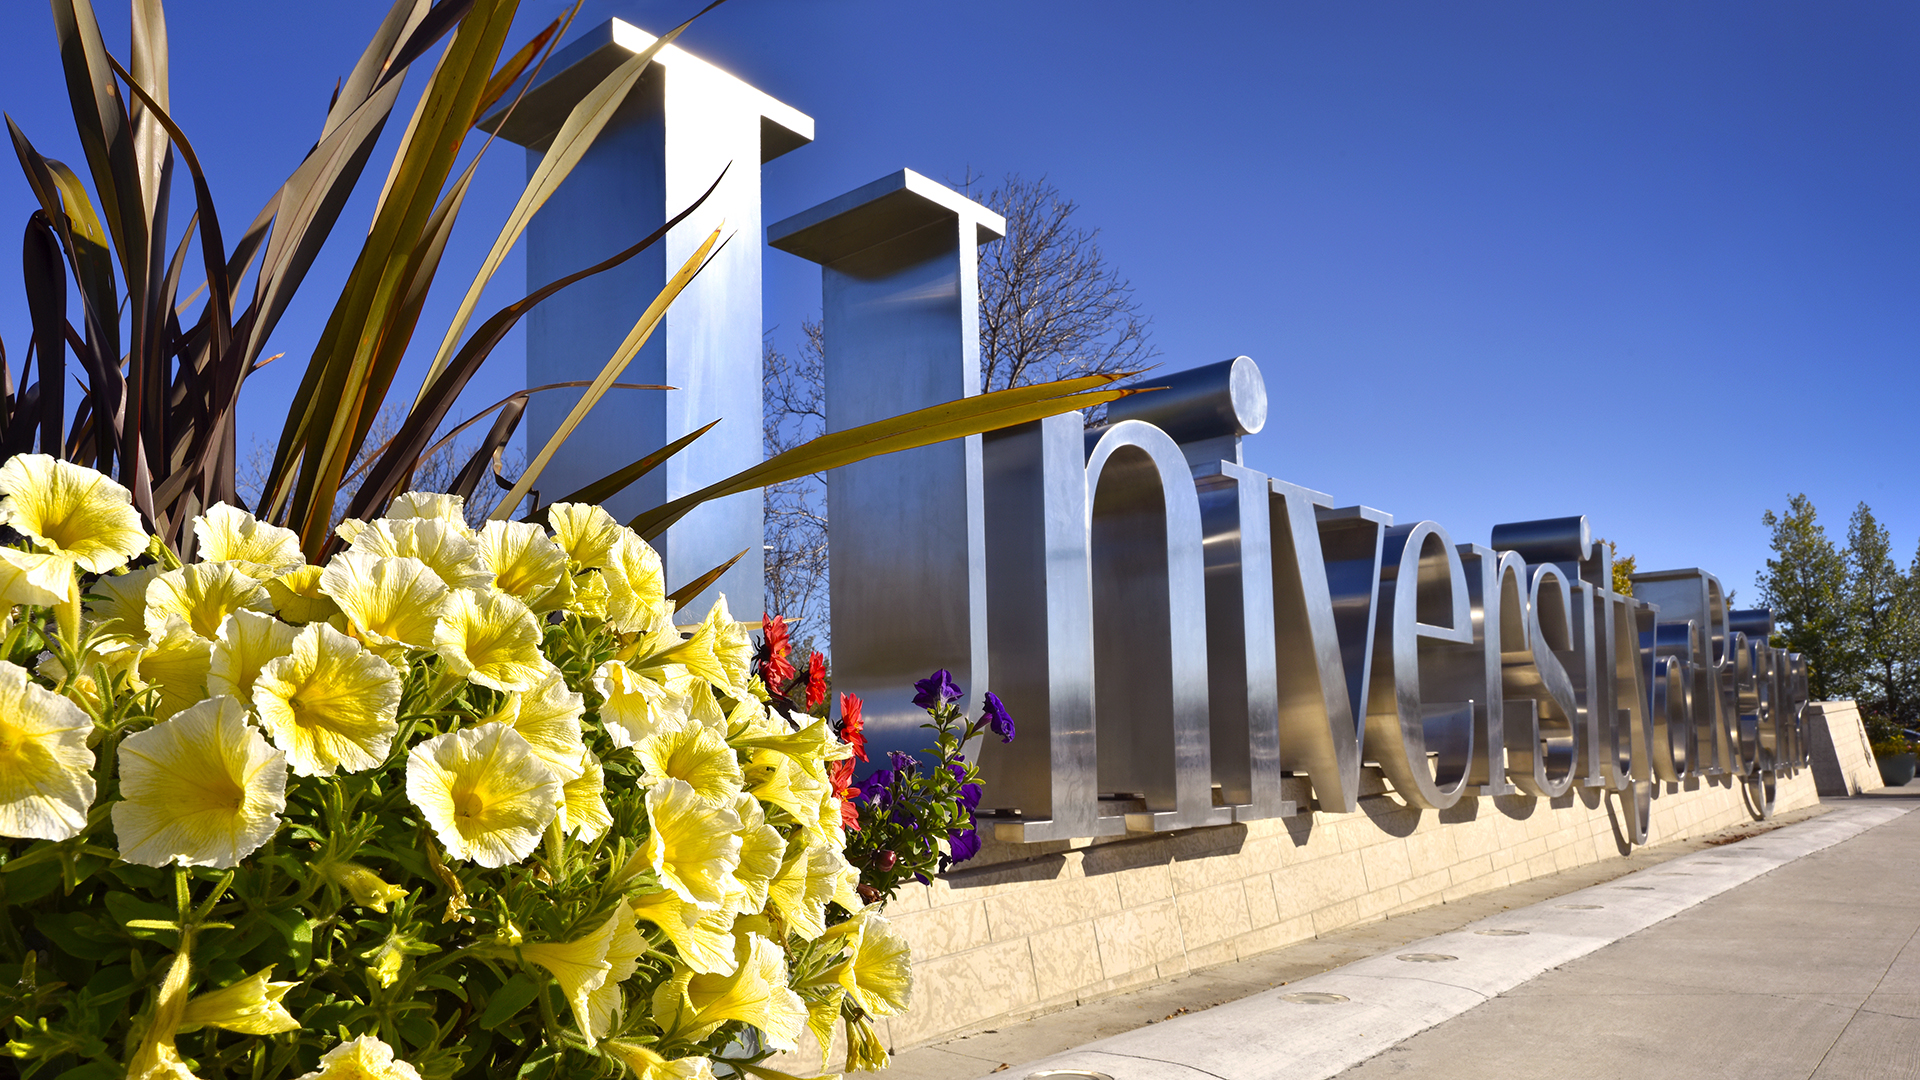 u of r sign with flowers